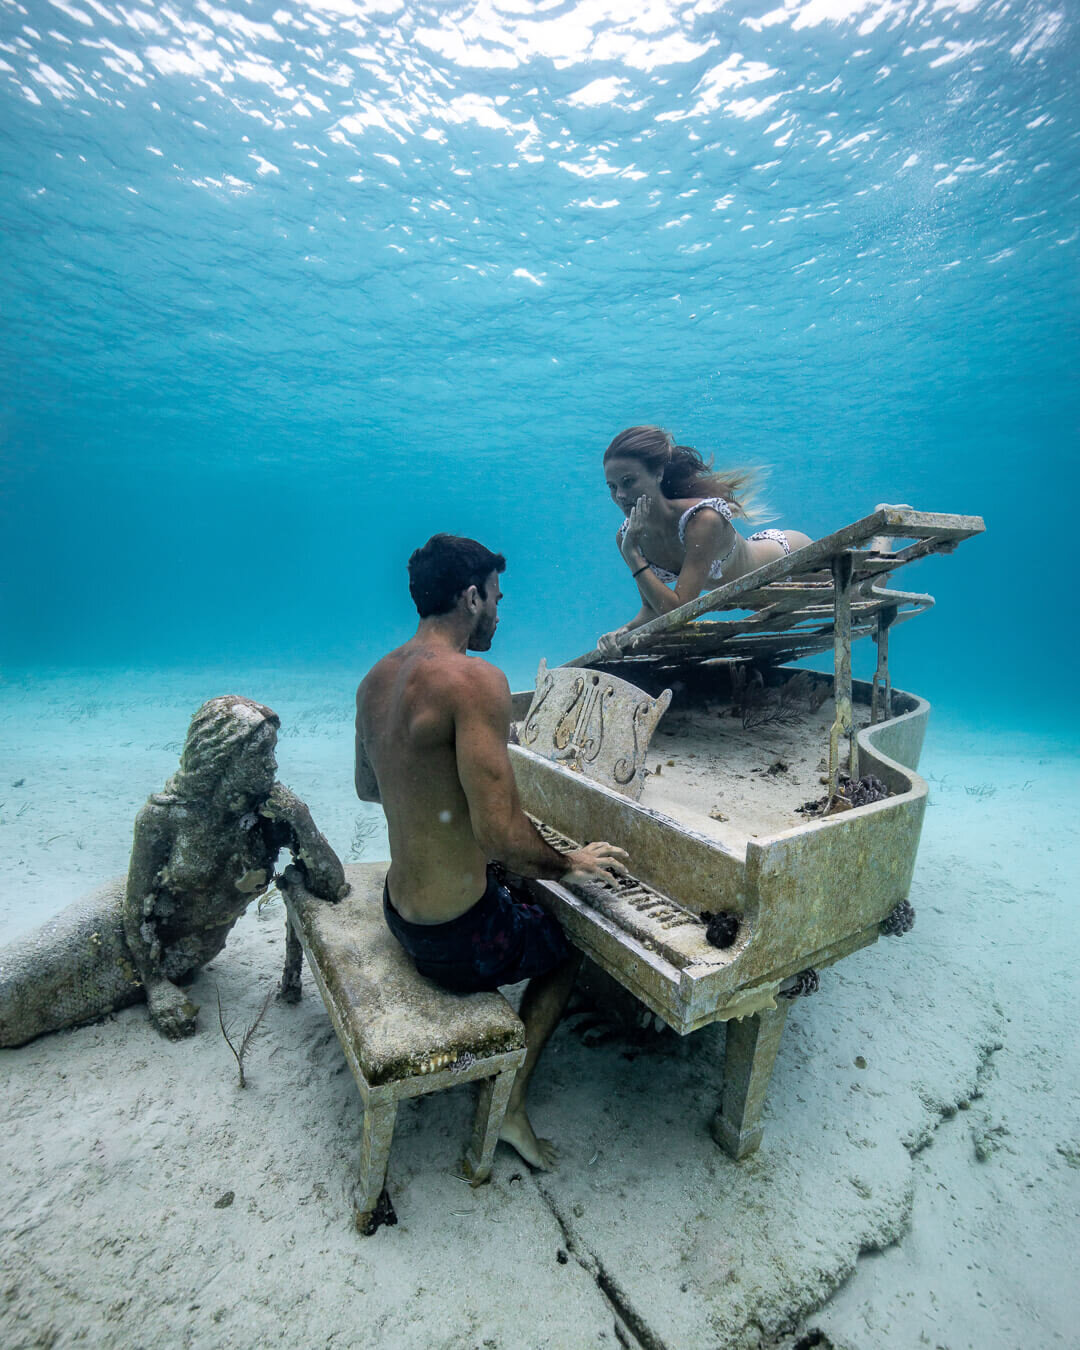 David Langlois  playing the piano for  Lauren Landers  at The Musician. David and Lauren run charter trips through The Bahamas on their sailboat  Boomsharkalaka . Photo by:  Quin Schrock .